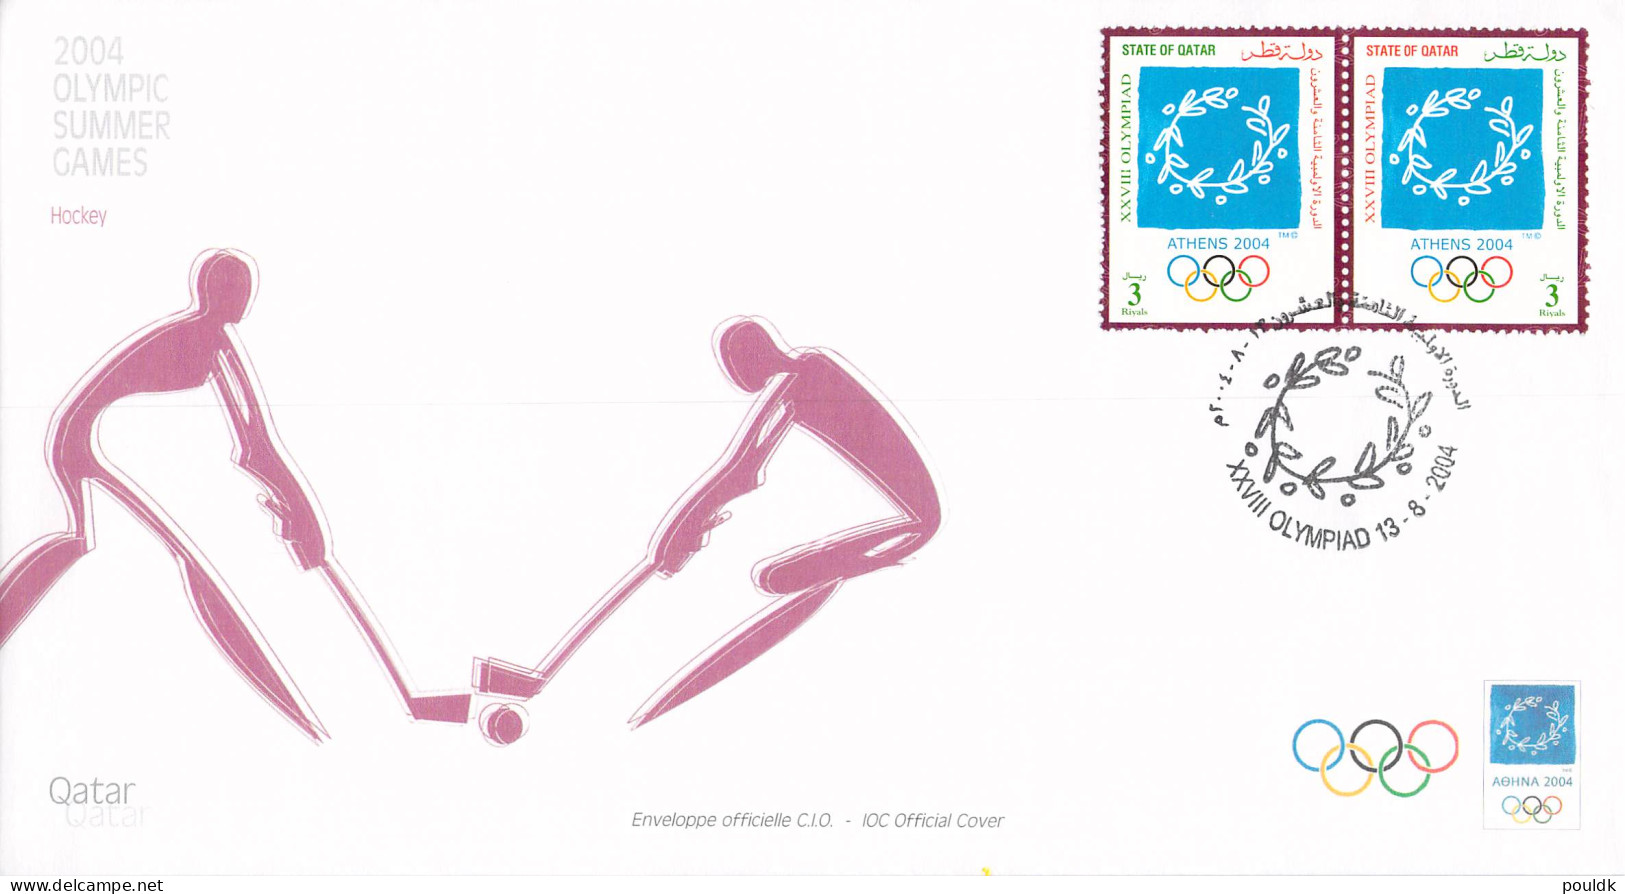 Olympic Games in Athens 2004 - ten covers, looks like FDC. Postal weight approx 0,09 kg. Please read Sales Con